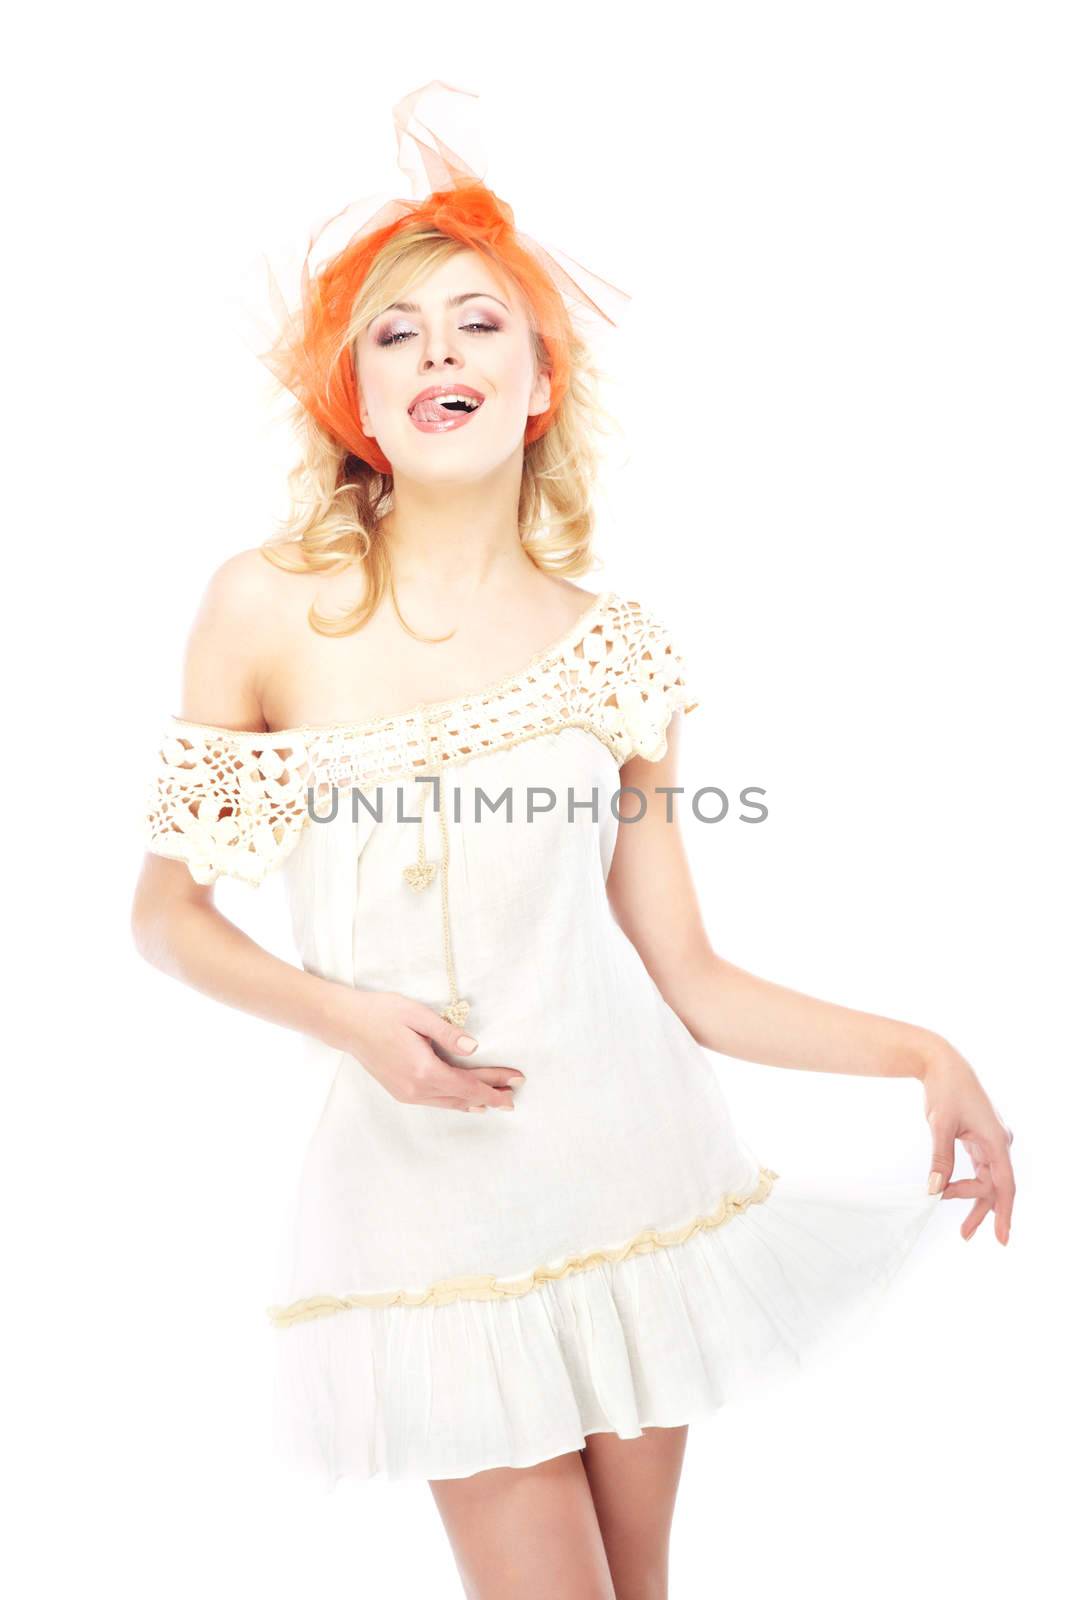 Playful smiling lady in white dress on a white background